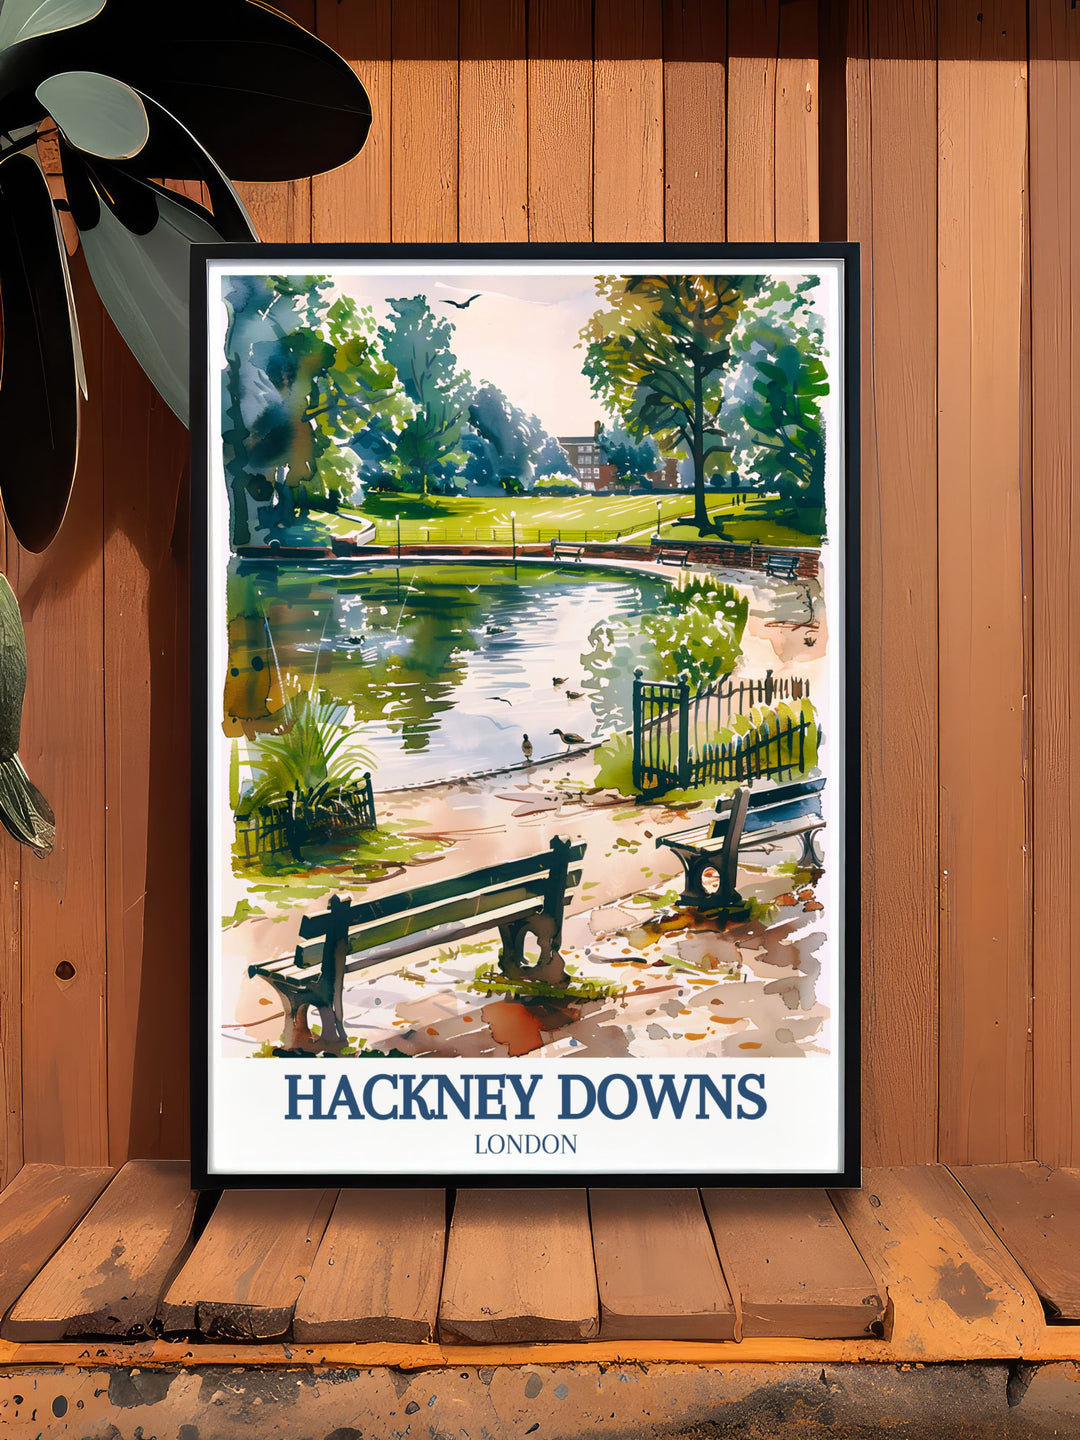 Featuring the iconic greenery of Hackney Downs, this travel poster captures the essence of its tranquil beauty and vibrant community, perfect for creating a serene atmosphere in any room.